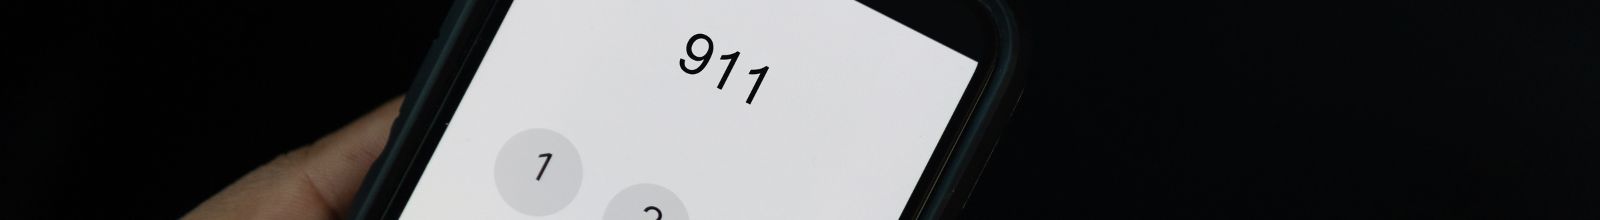 A phone with 911 punched into the calling number